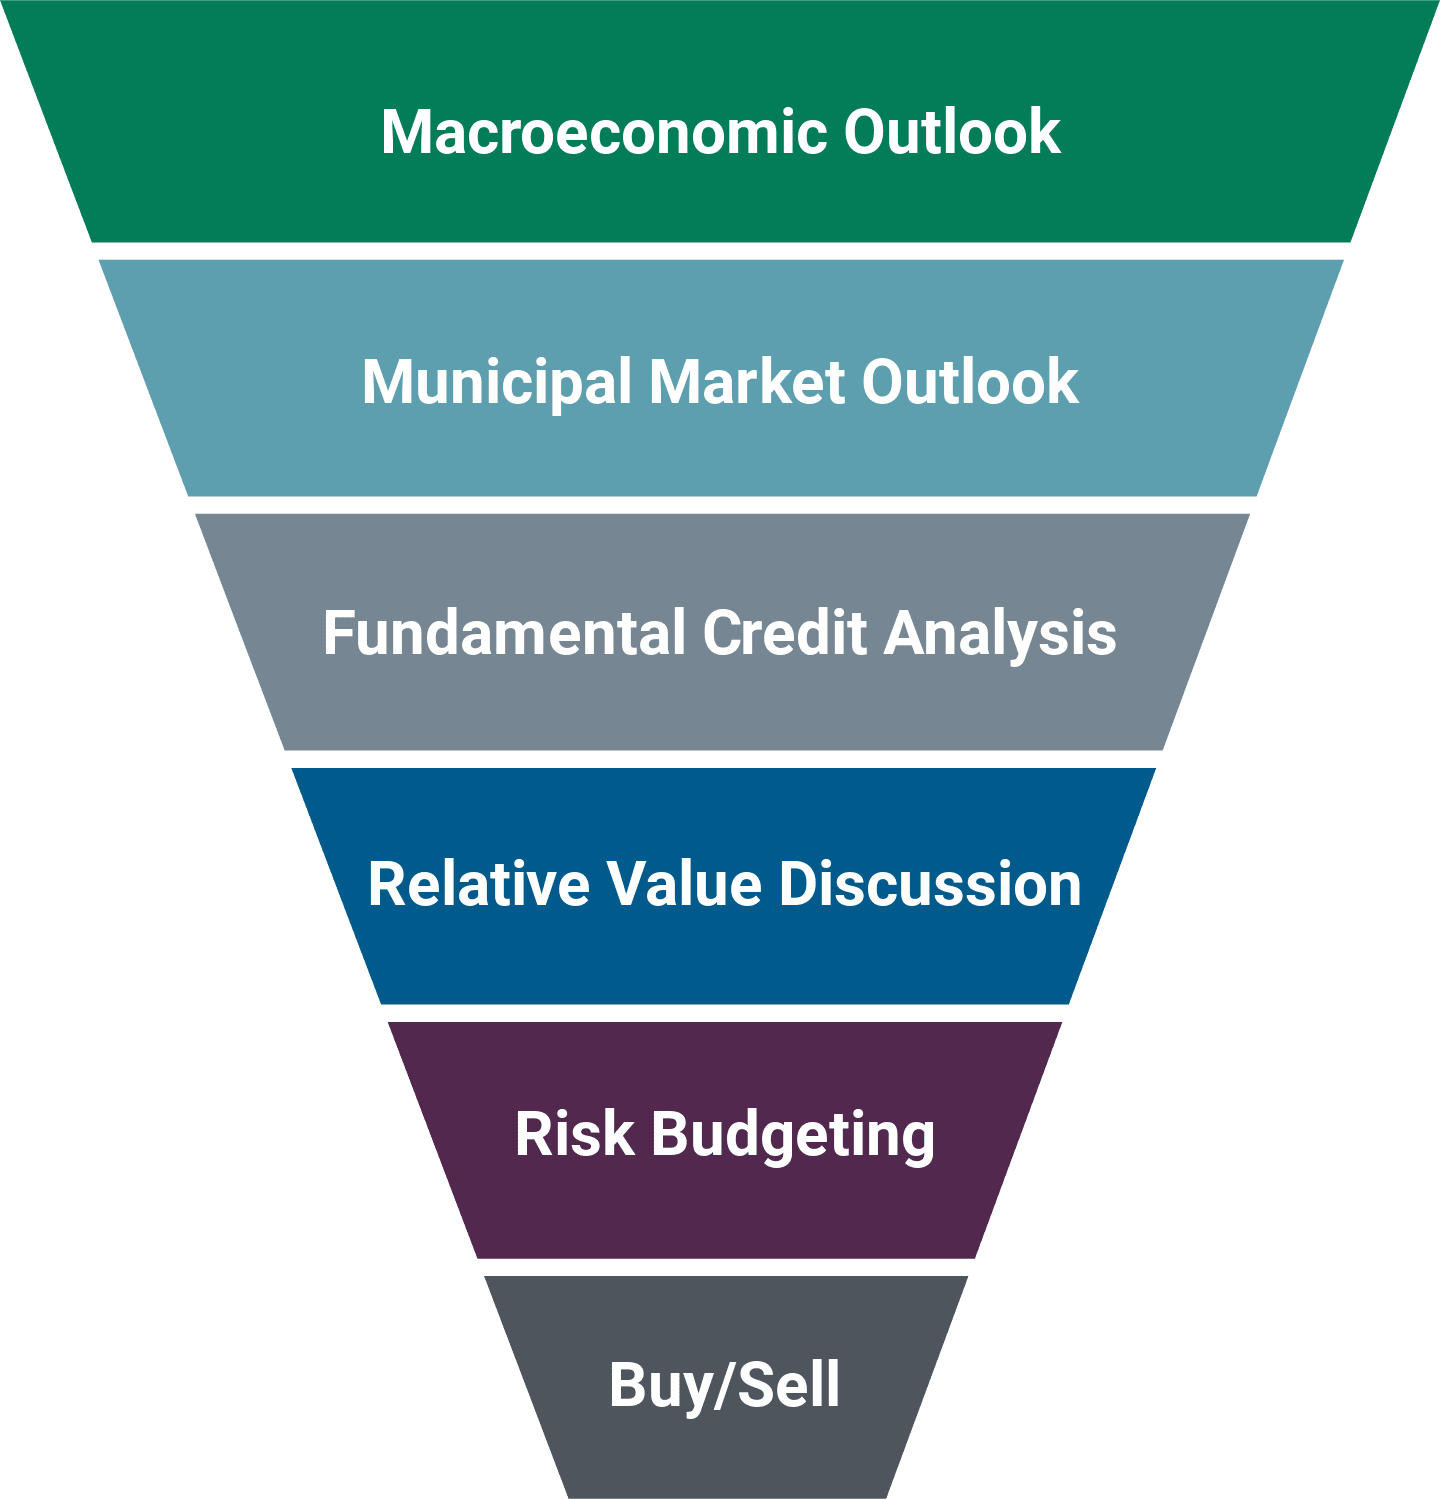 Funnel-shape illustration depicting the research process gradually narrowing from a high-level macroeconomic outlook to fundamental research and buy/sell decisions.